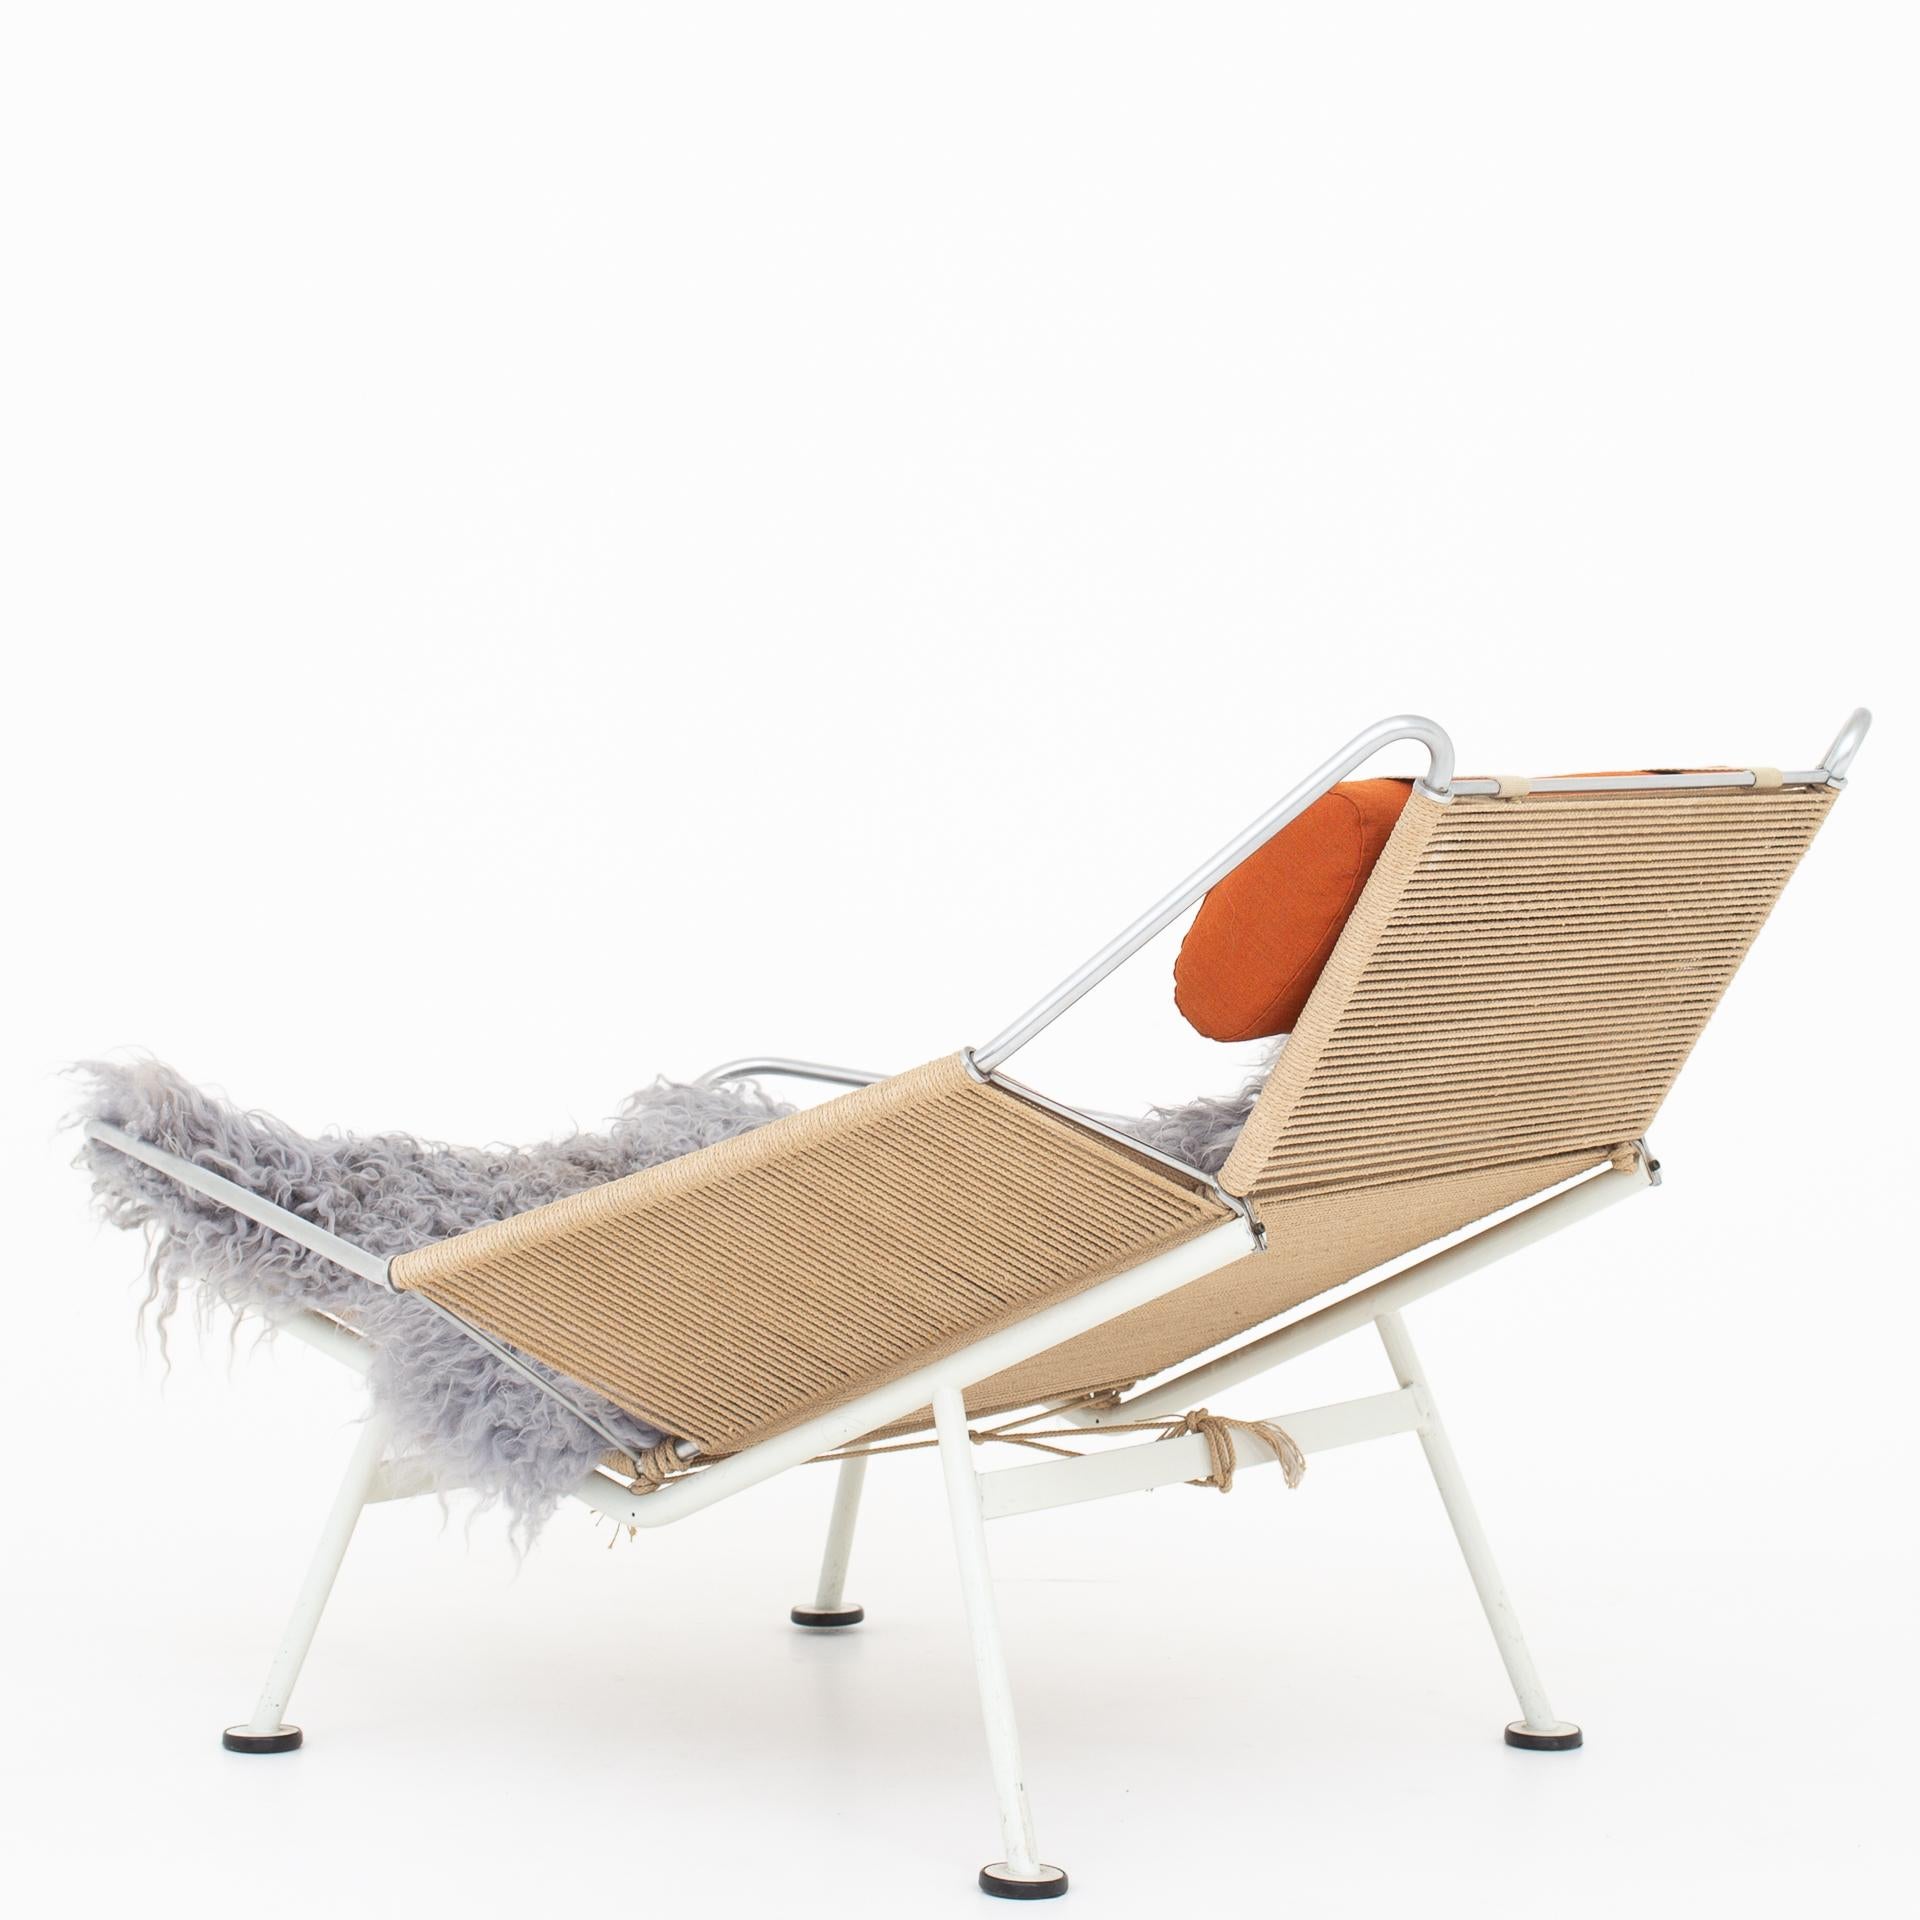 GE 225, flag halyard chair with white lacquered frame and original braid. New wool hide and neck cushion in orange Remix. Maker GETAMA.